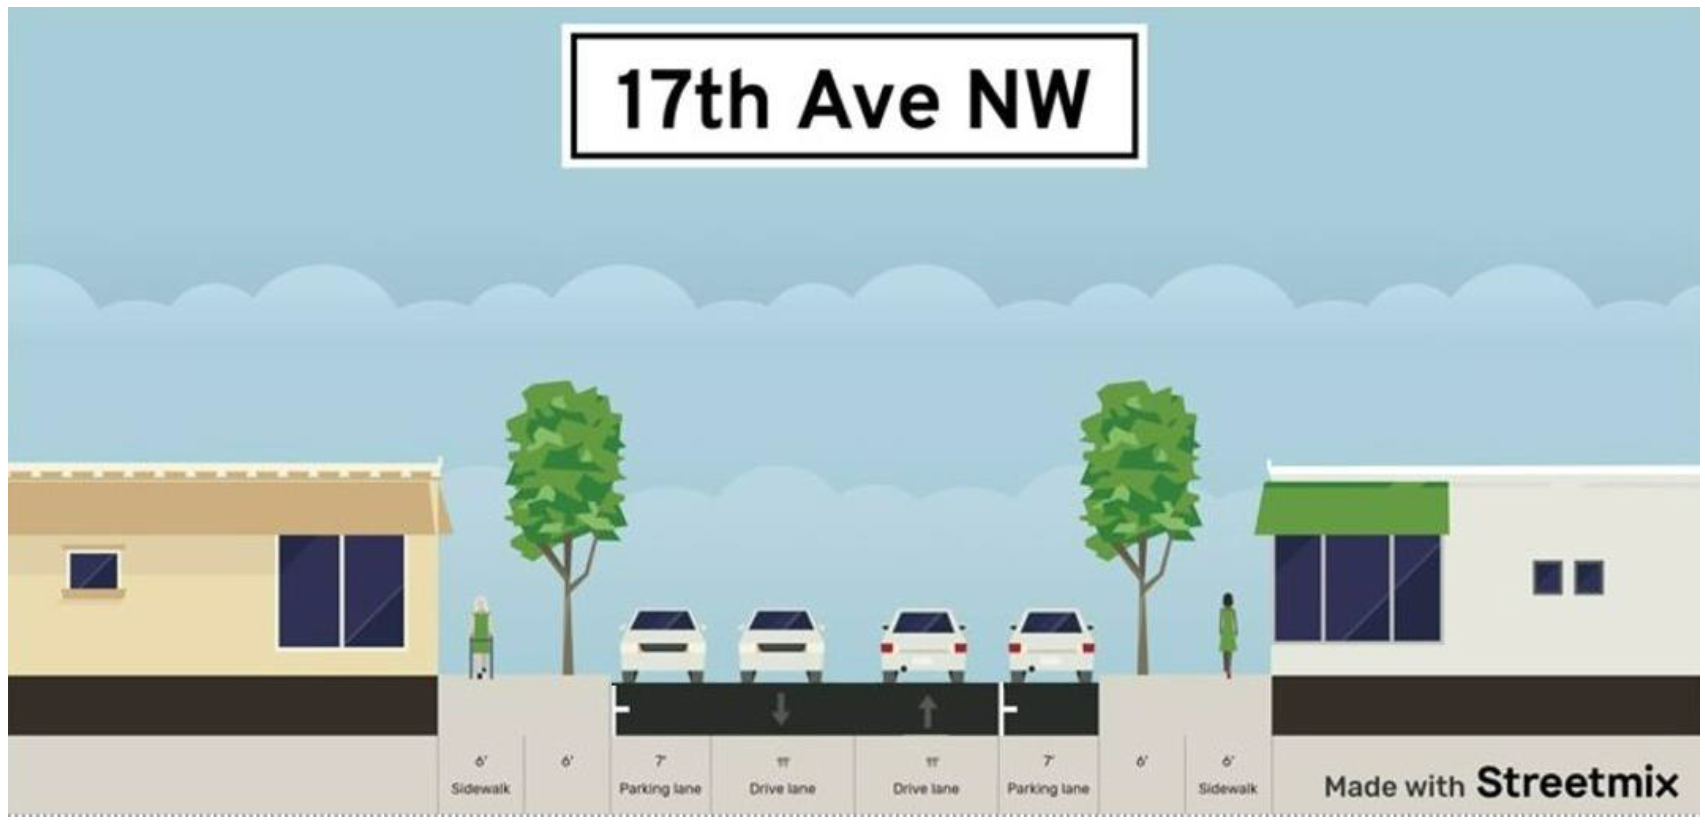 A cross section of 17th Ave NW showing two vehicle lanes and two parking lanes, a 6 inch sidewalk on either side and a six inch planting strip